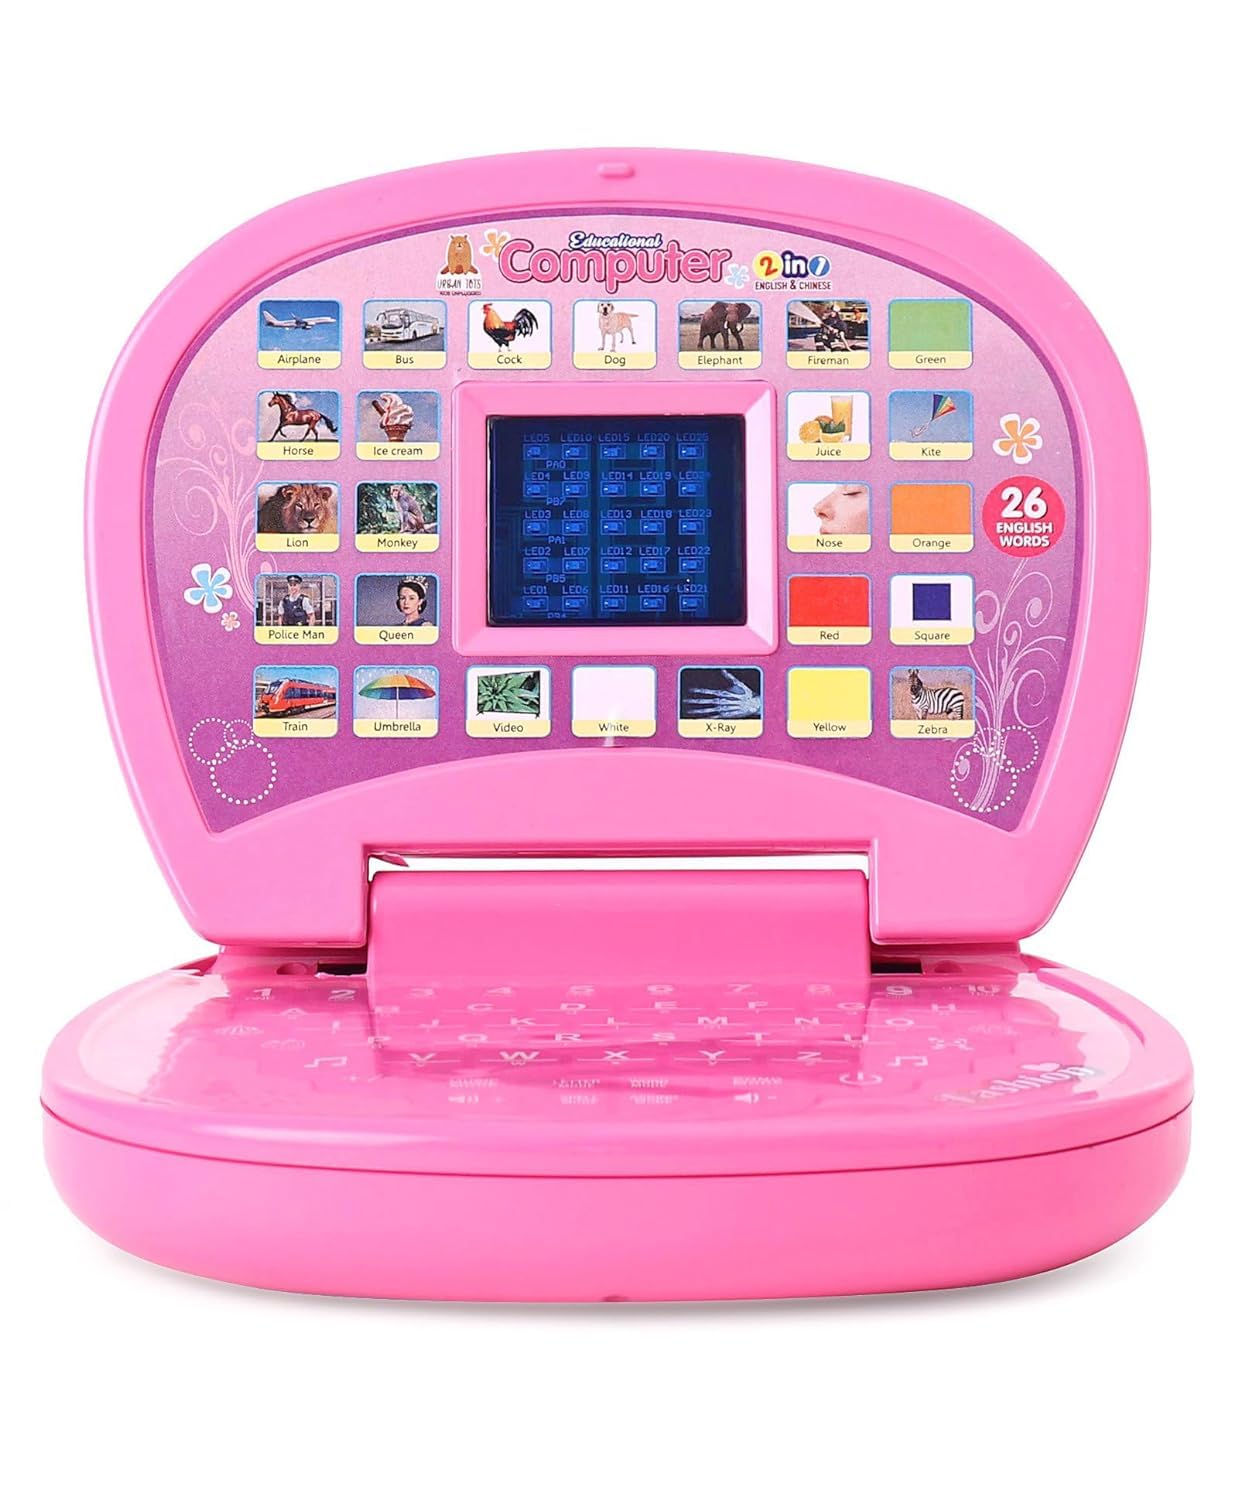 Braintastic Laptop Computer Musical Learning Educational Toy with Led Display & Music for Kids Age 3+